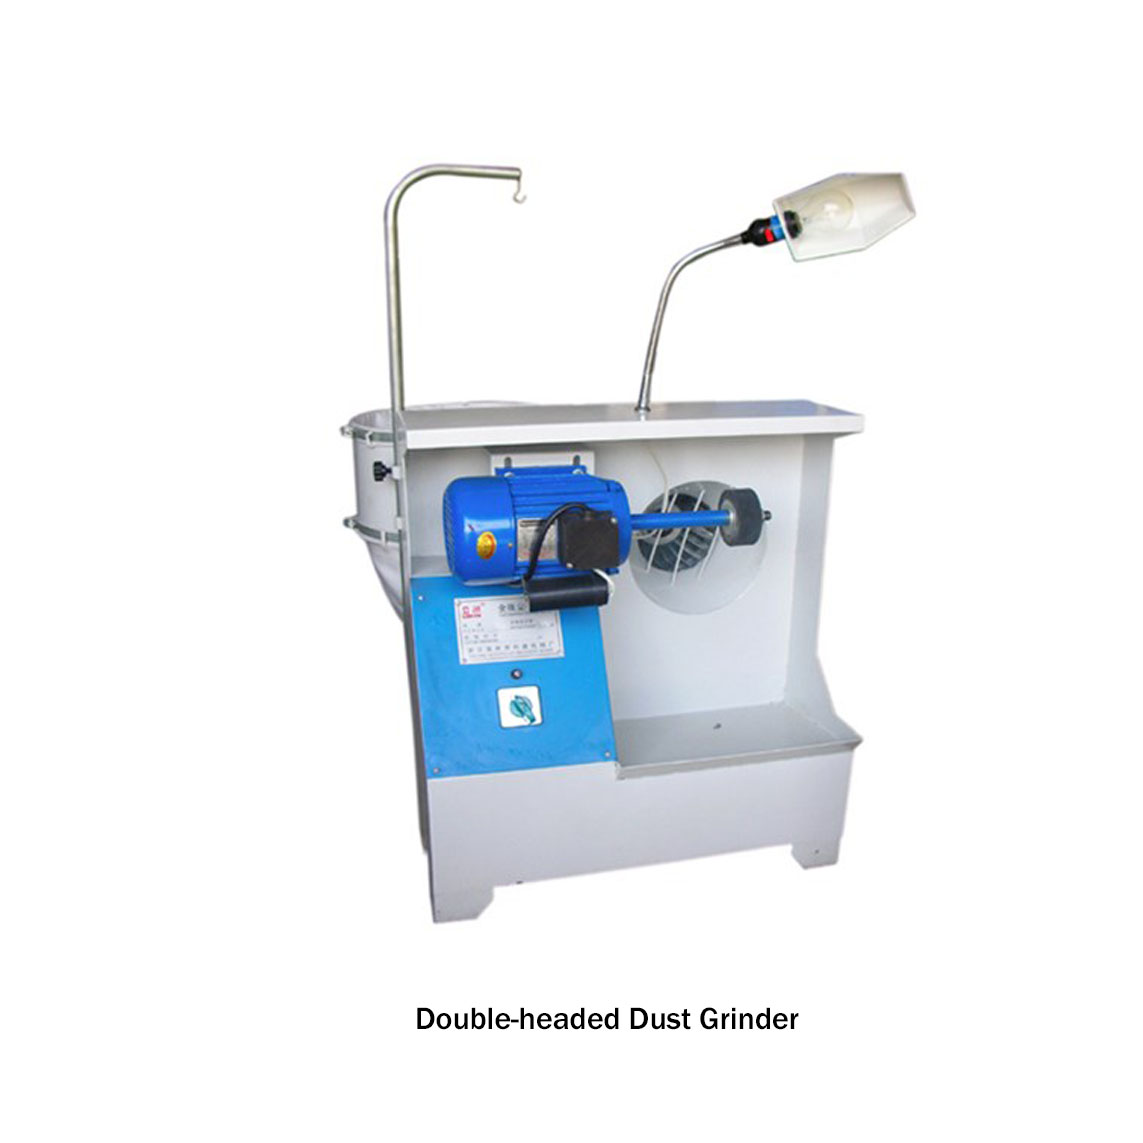 Double-headed Dust Grinder